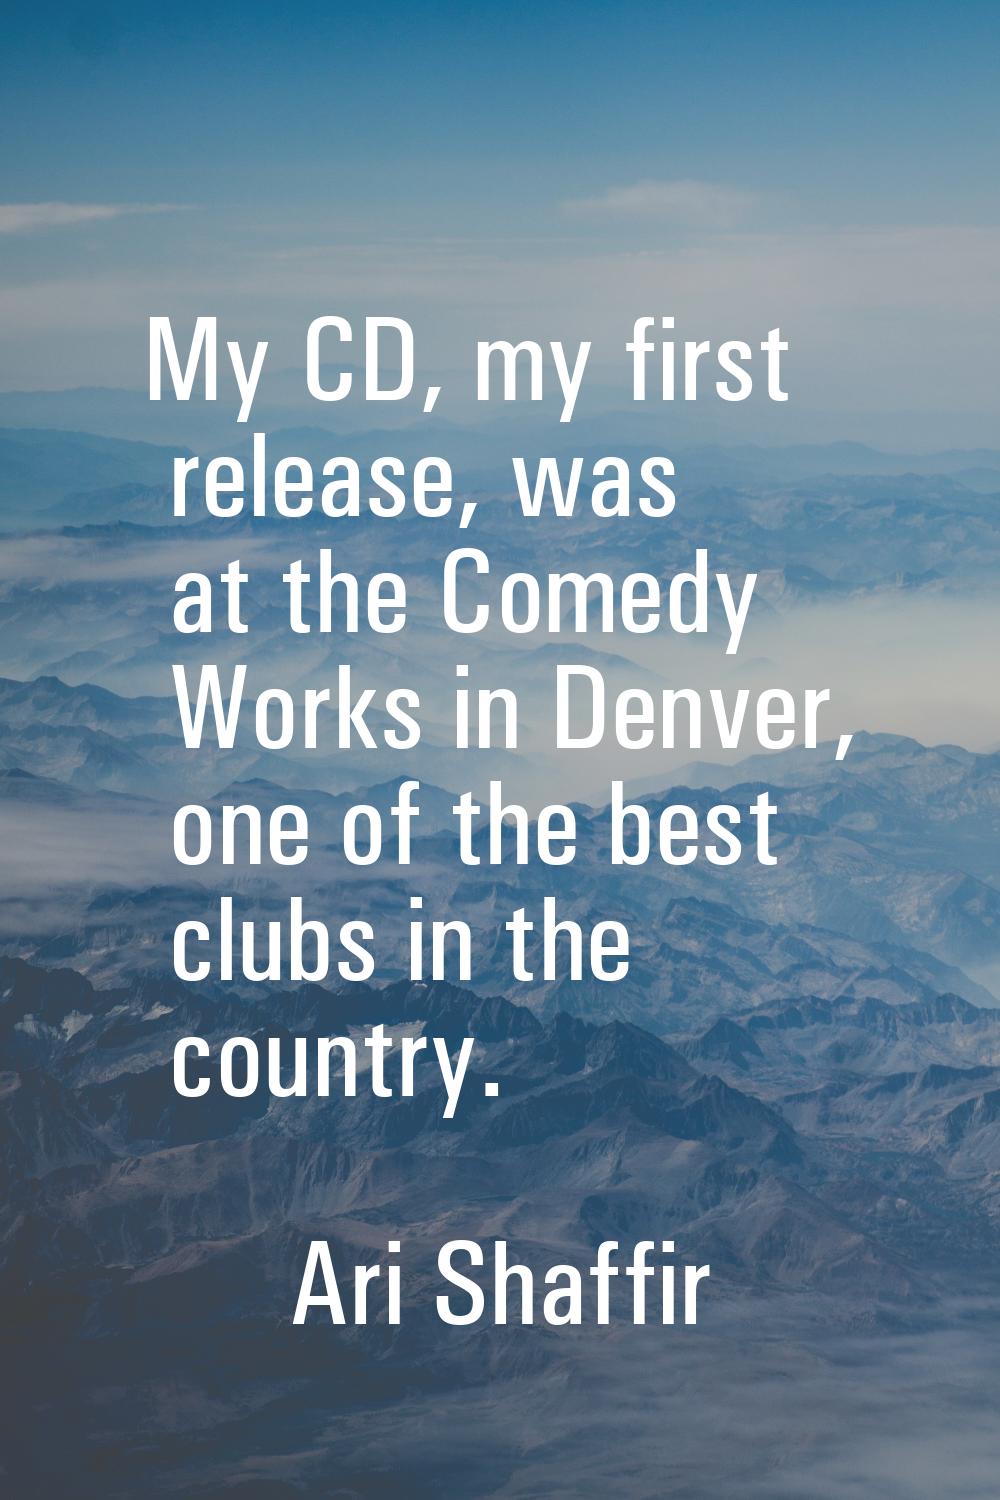 My CD, my first release, was at the Comedy Works in Denver, one of the best clubs in the country.